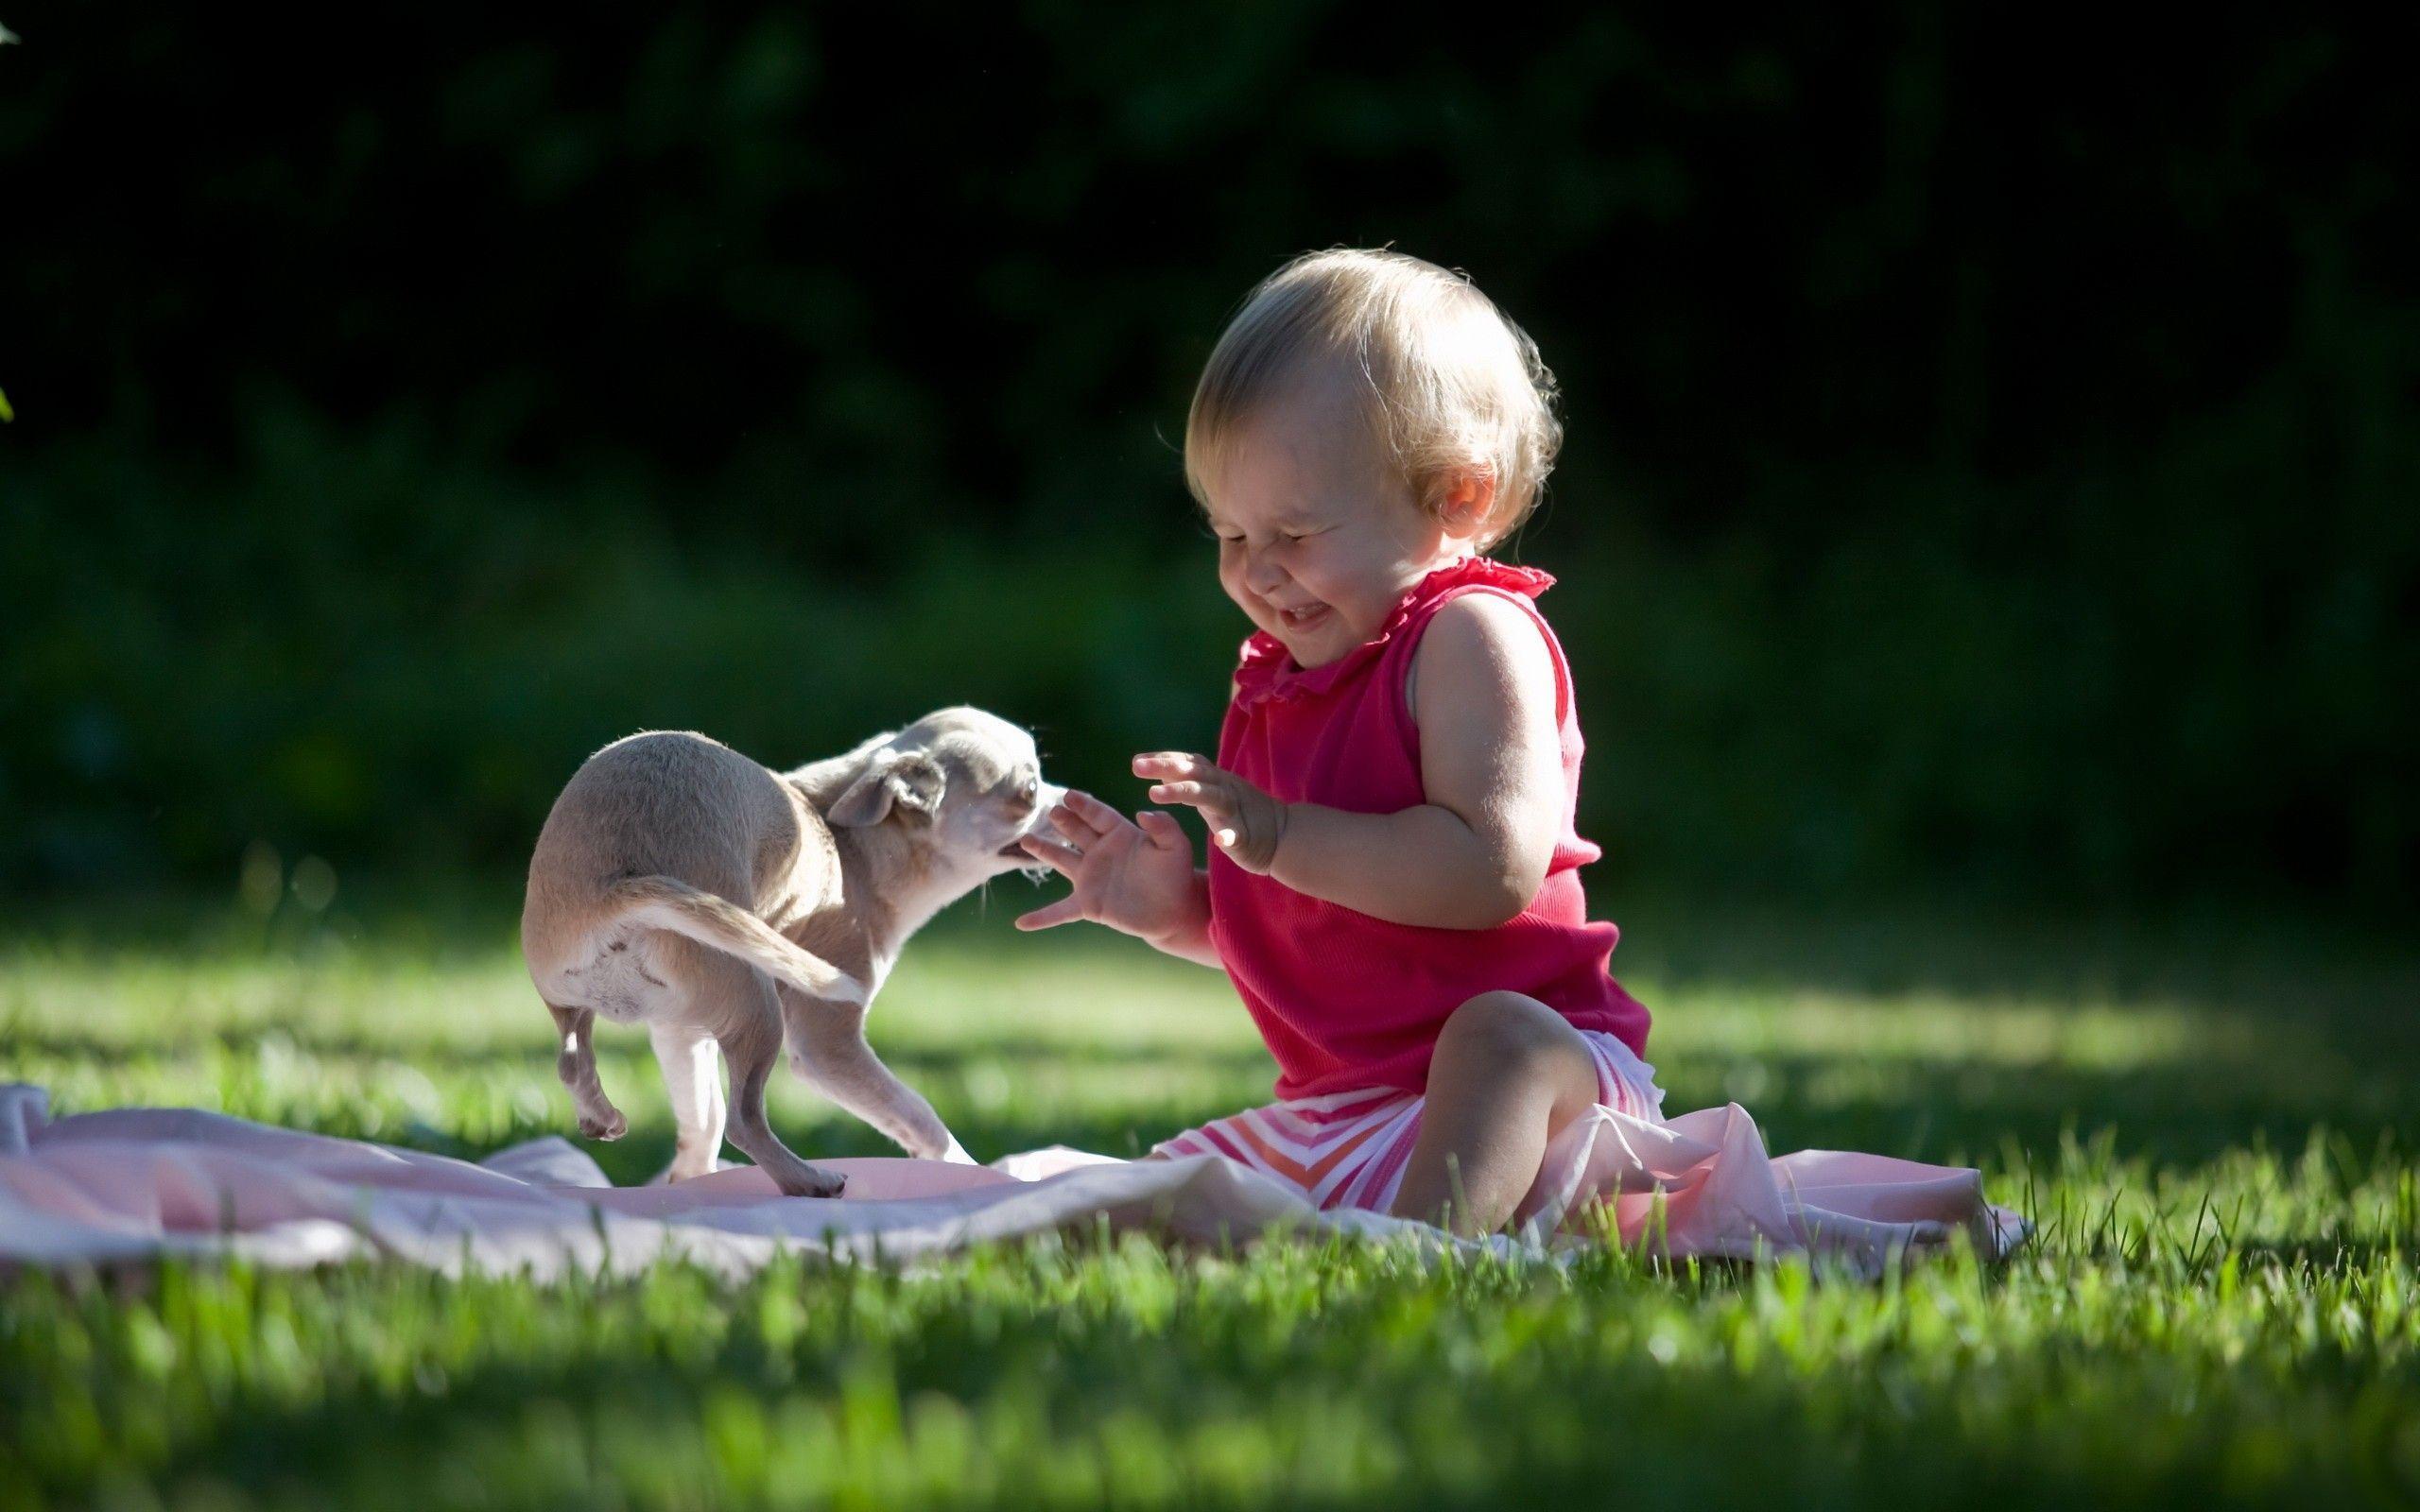 dog and baby